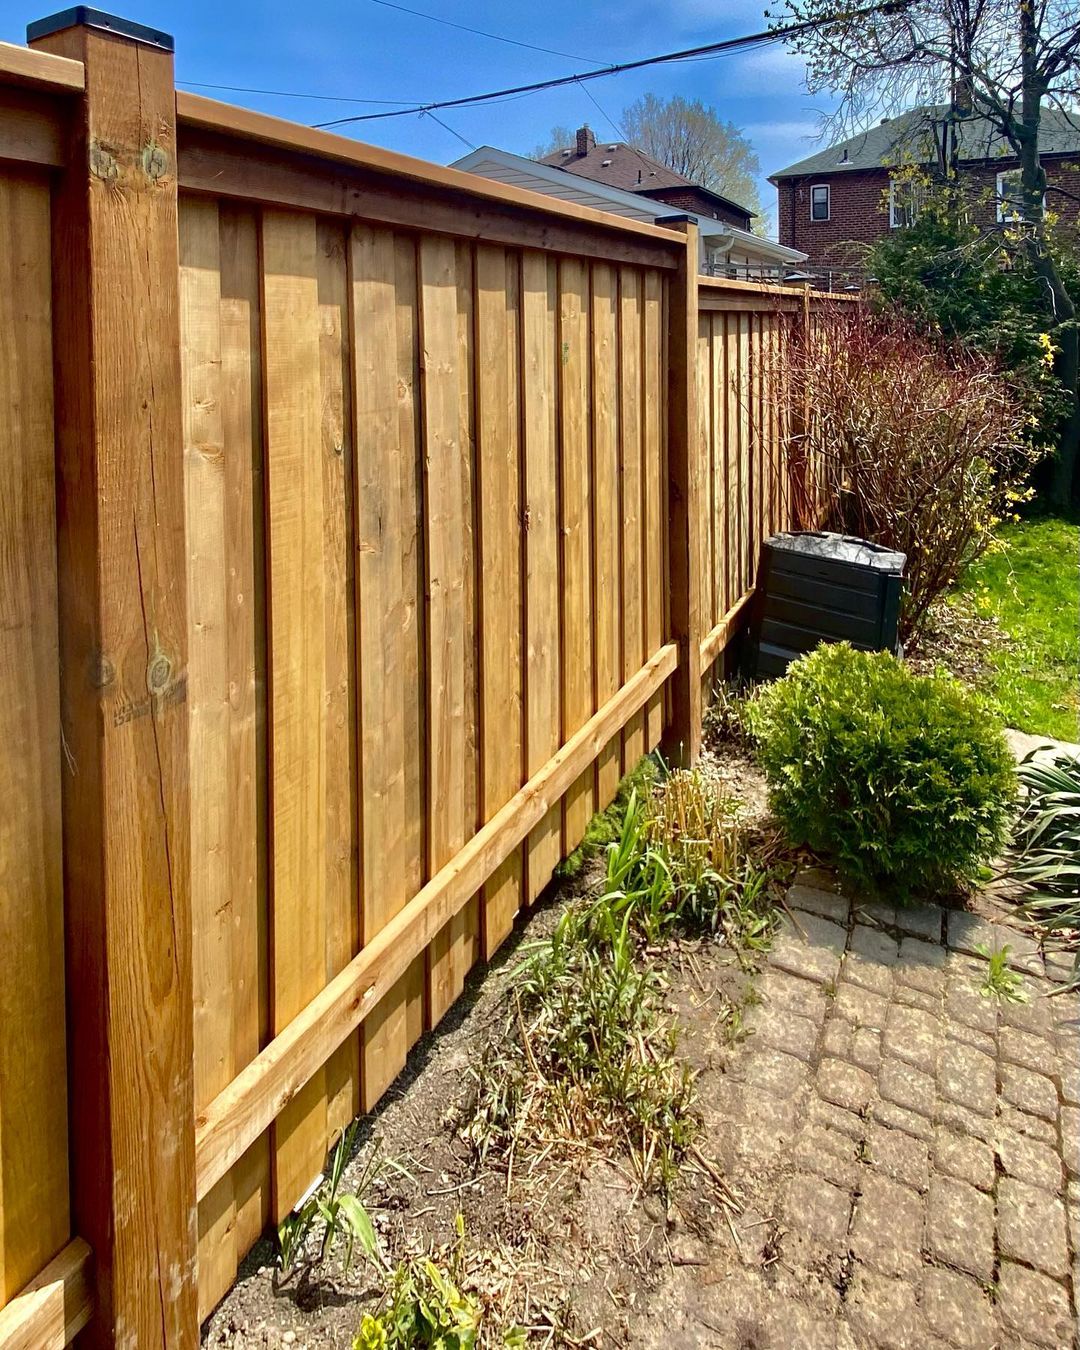 🔹PRESSURE TREATED - Full privacy 

📌 Pressure treated should be used for all outdoor projects, choose any style of your liking with the help of our team!

🦺 We install various types of fence for any sized properties for both residential and commercial clients

📍 Contact us today for your free estimate:

📱 (647) 913 6405

📨 office@propertyfence.ca

.
.
.

#propertyfence #propertyfencing #propertyfencing #property #propertyinvestment #property #propertyinvestor #propertydevelopment #propertydeveloper #investmentproperty #fence #fencebuilding #fencebuilders #fenceinstallation #fencecontractor #fenceideas #fencedesign #fenceideas #fencepostfriday #fencedhouse #fencecompany #woodfence #fencecompany #fencelife #gardenfence #newfence #aluminumfence #customfence